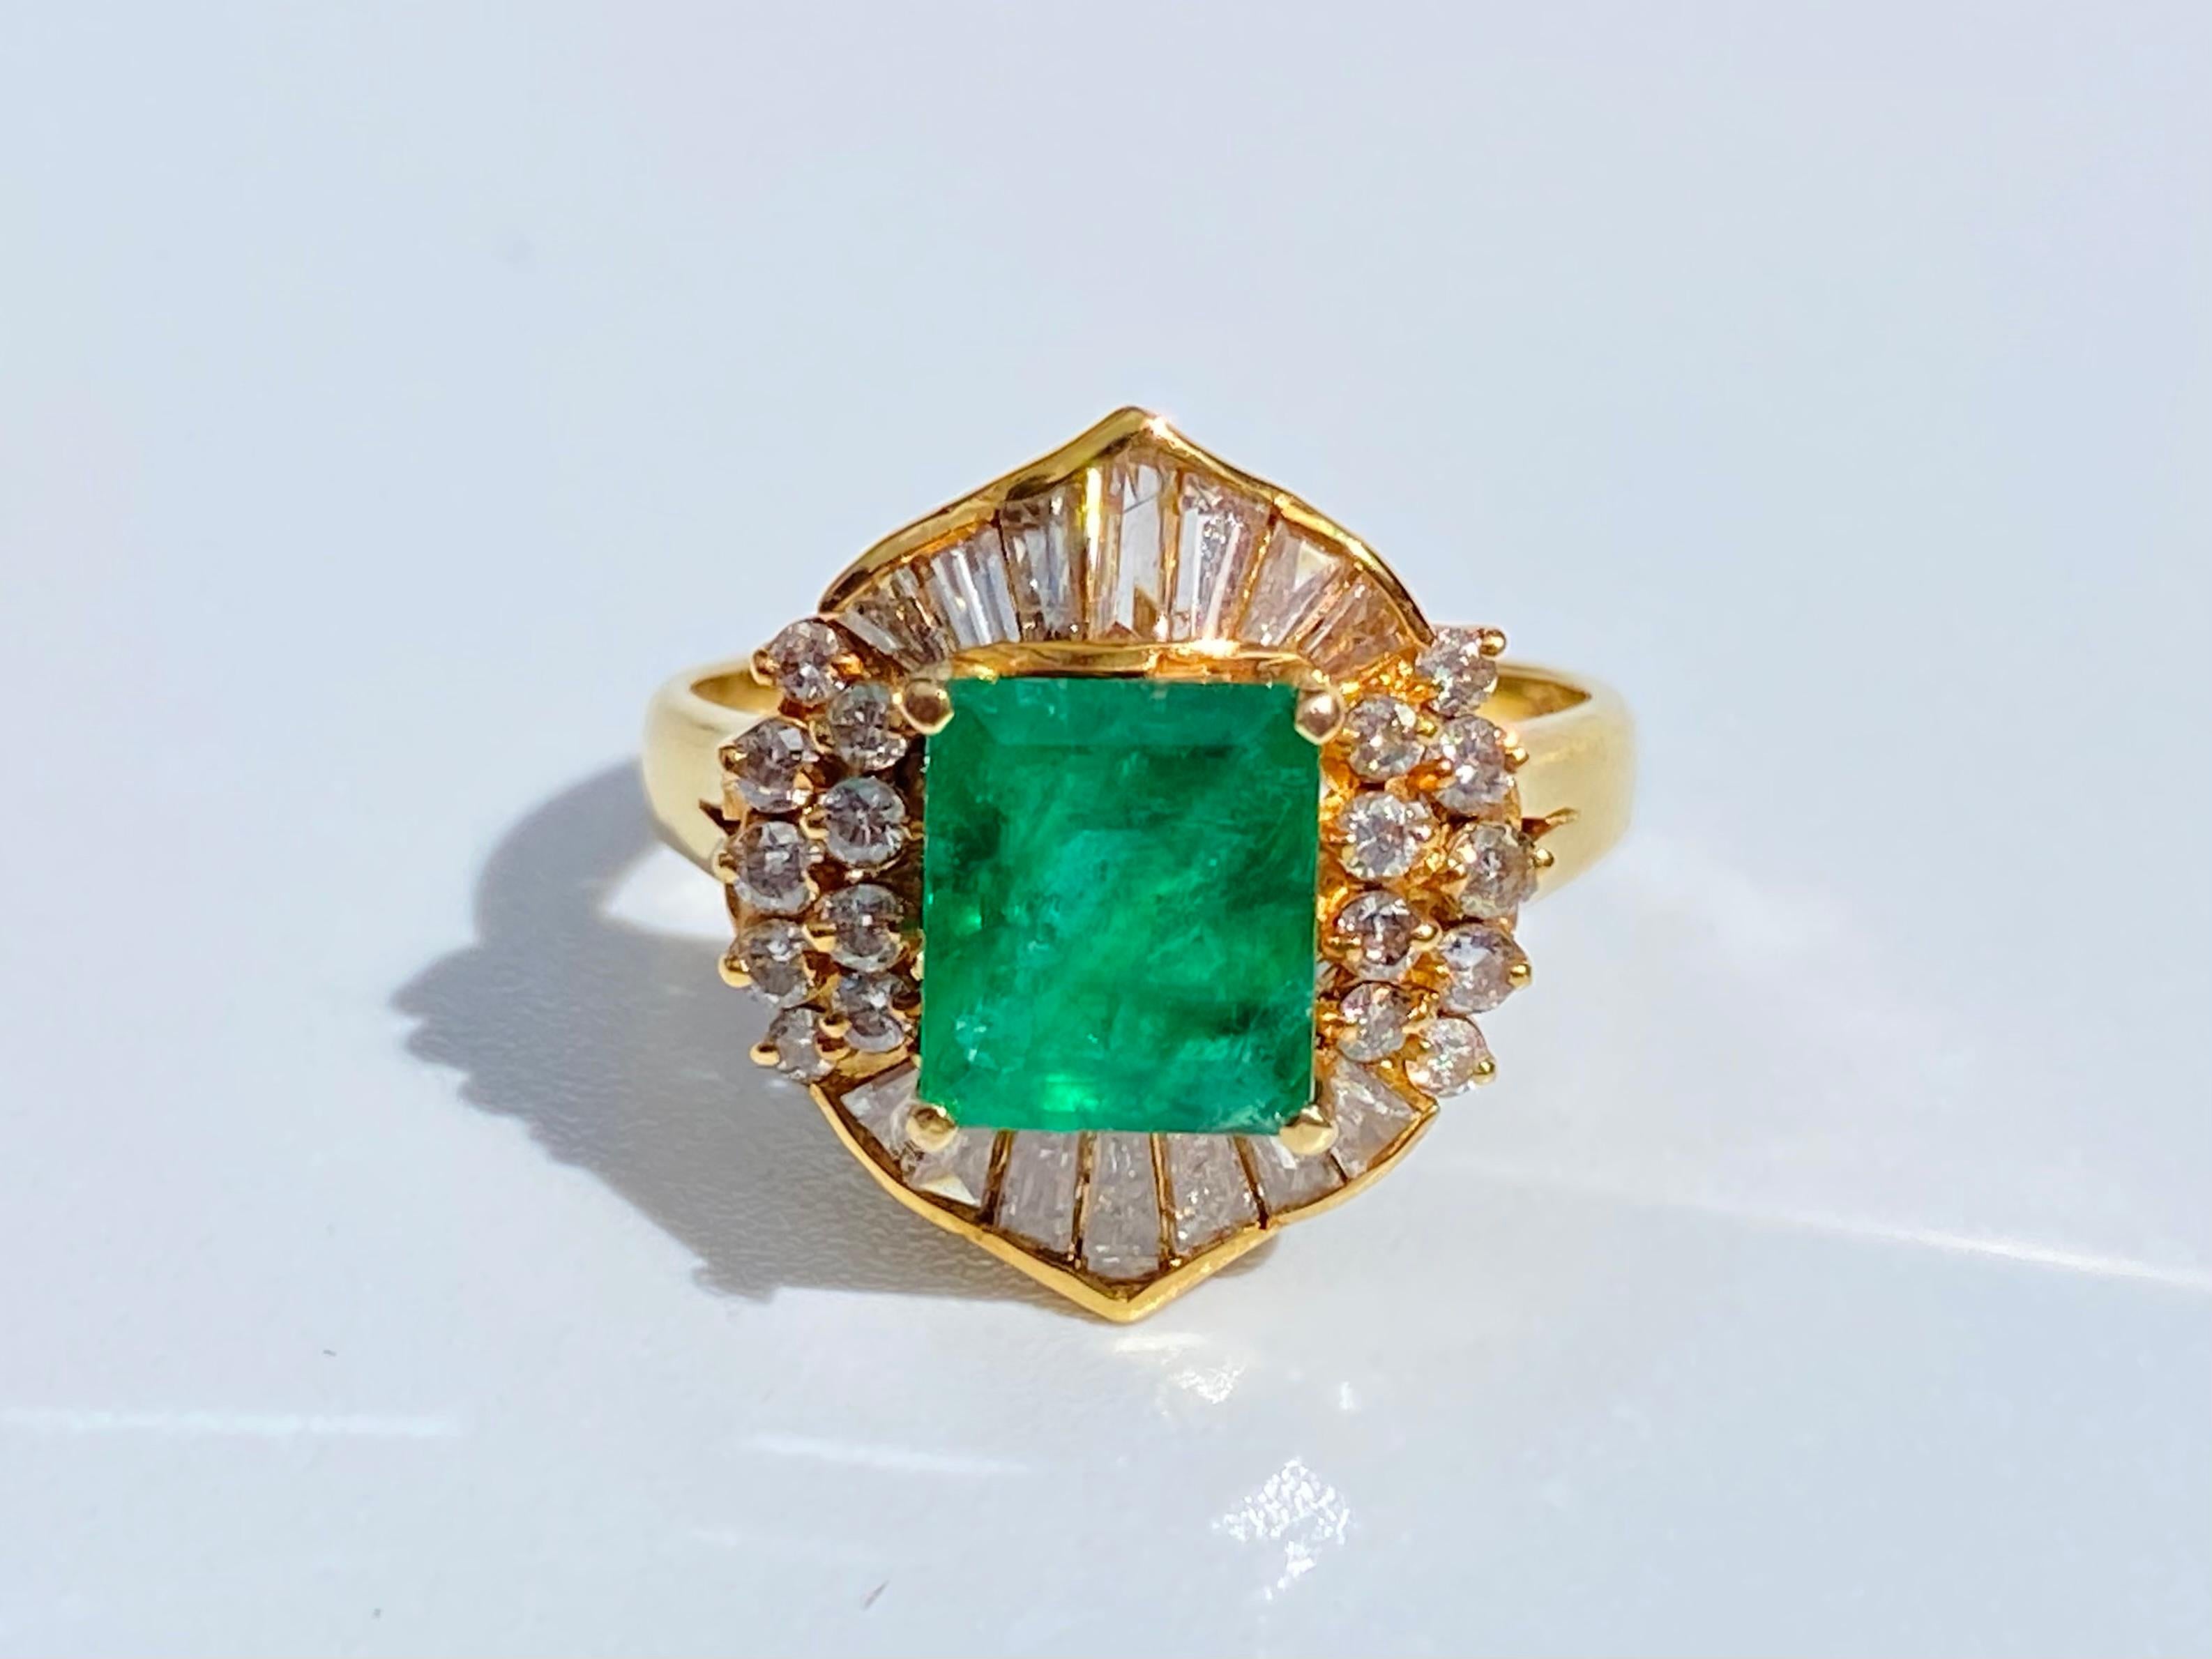 Emerald Cut 7.41 Carat Colombian Emerald and Diamond Pendant, Earring and Ring 18K Gold Set For Sale